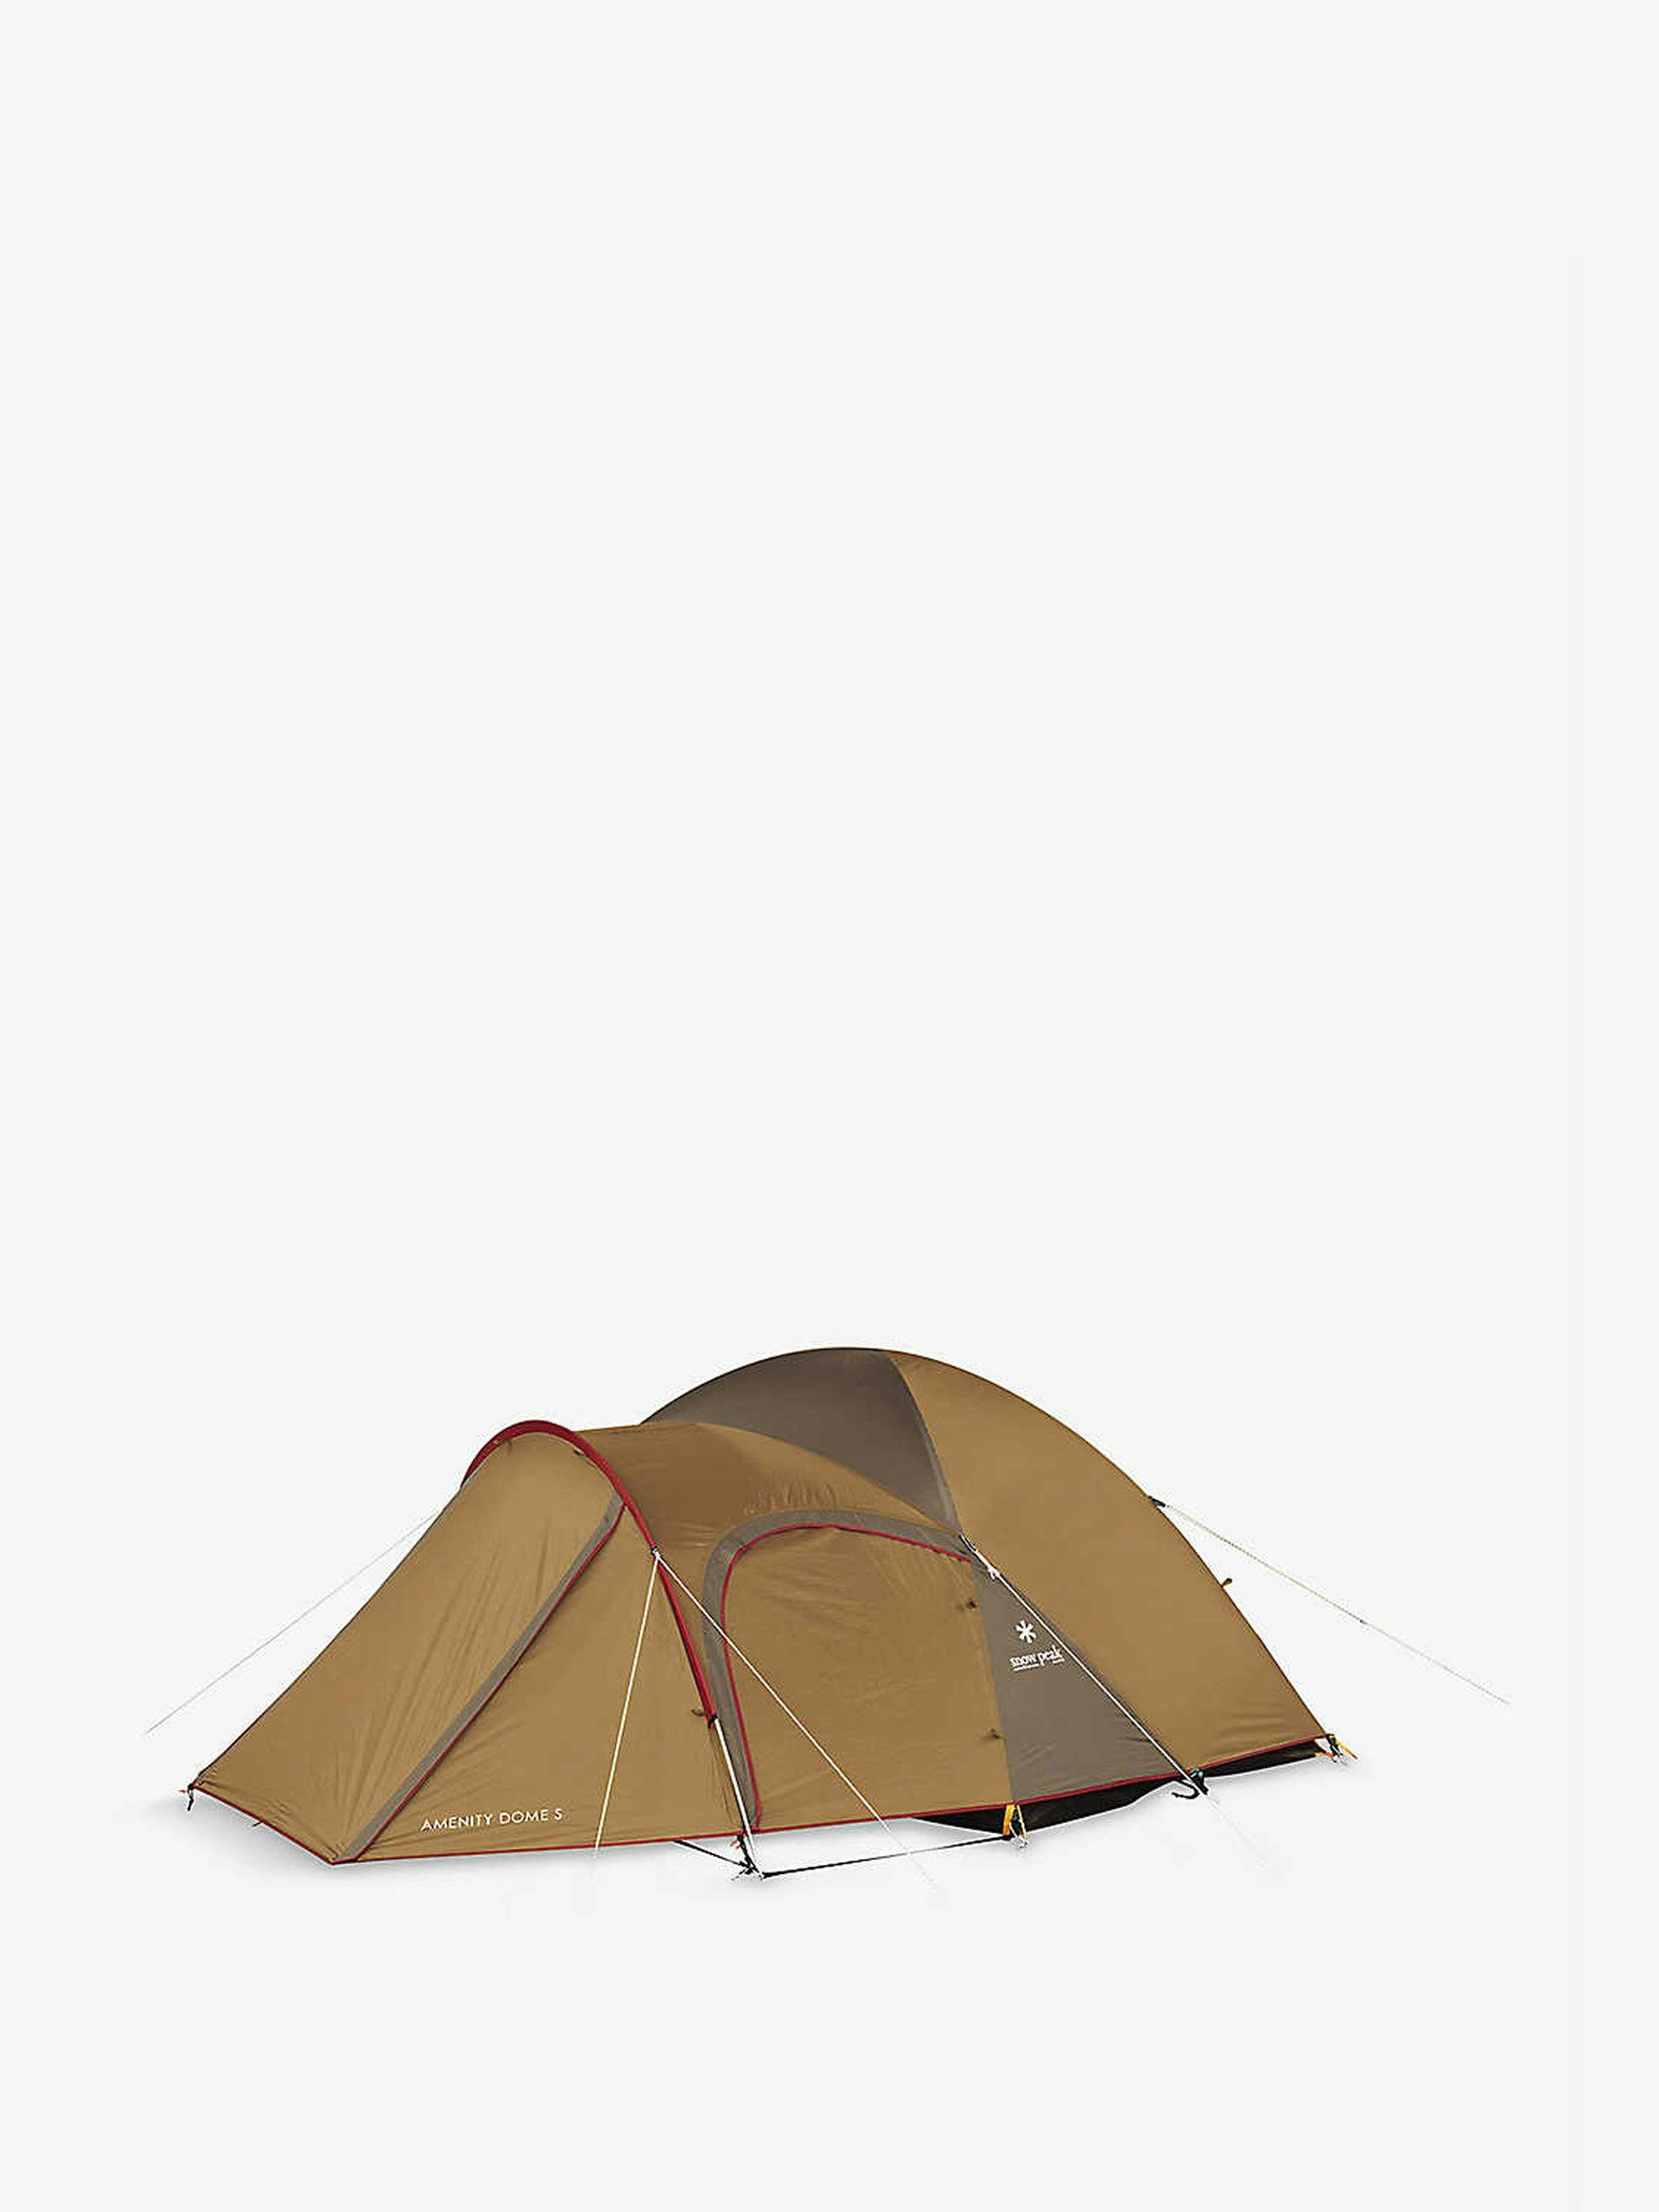 Amenity Dome water-resistant shell tent